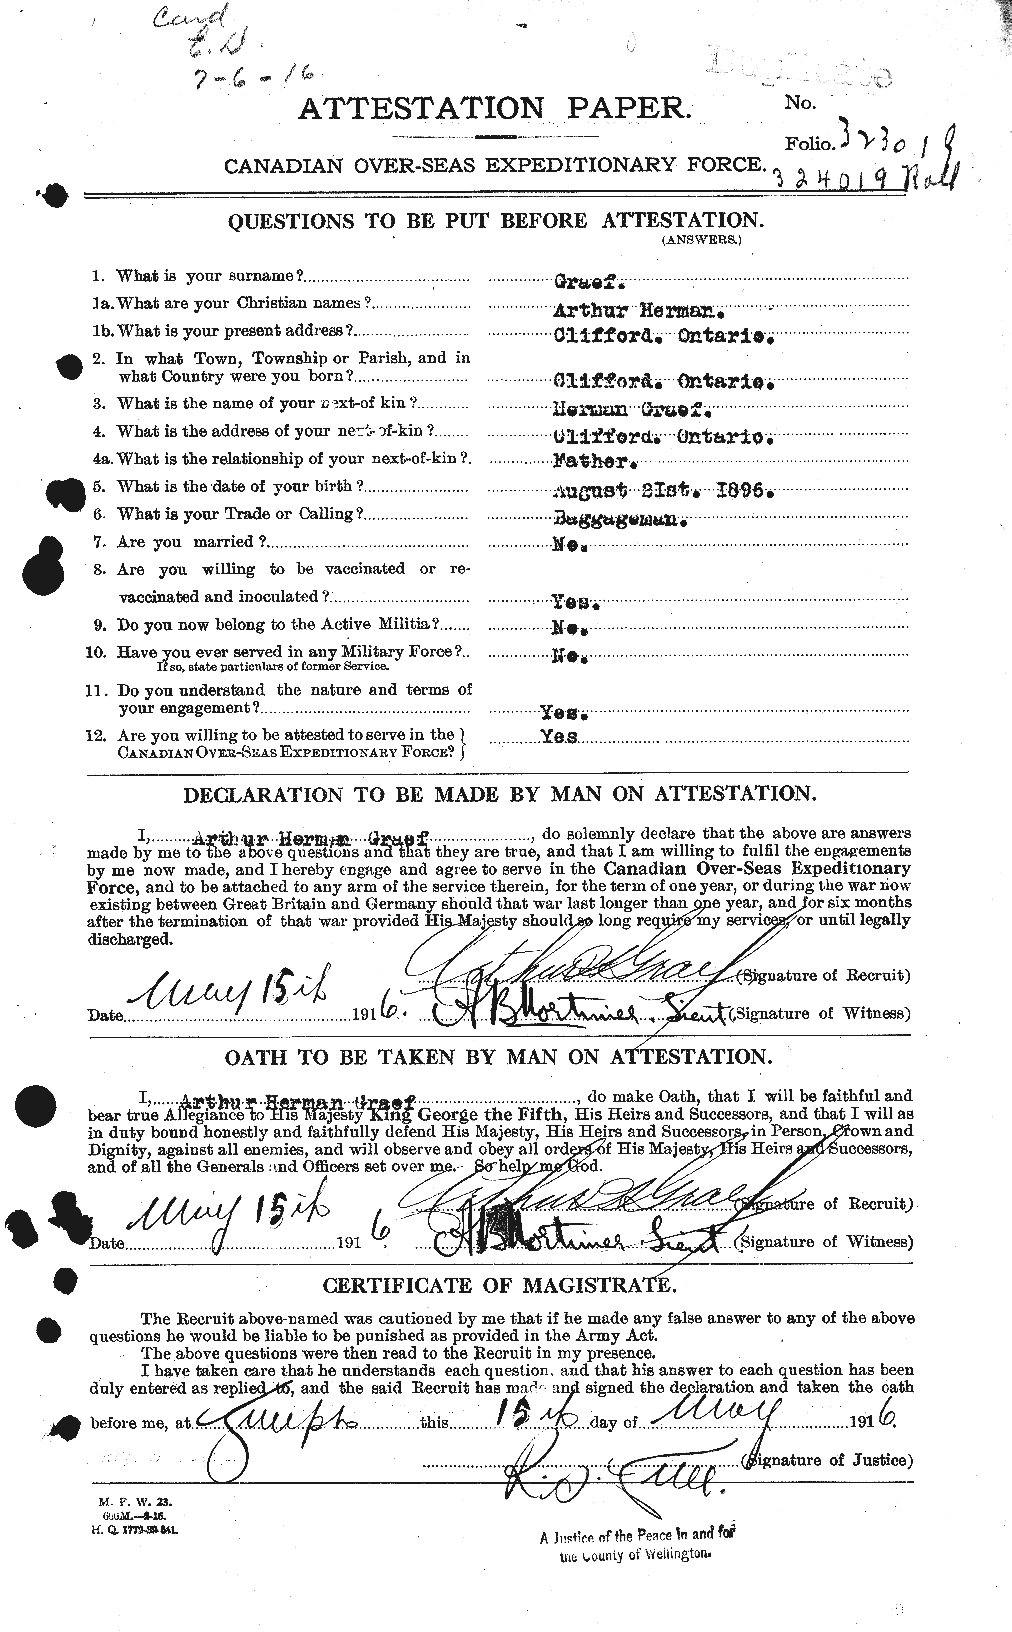 Personnel Records of the First World War - CEF 357523a